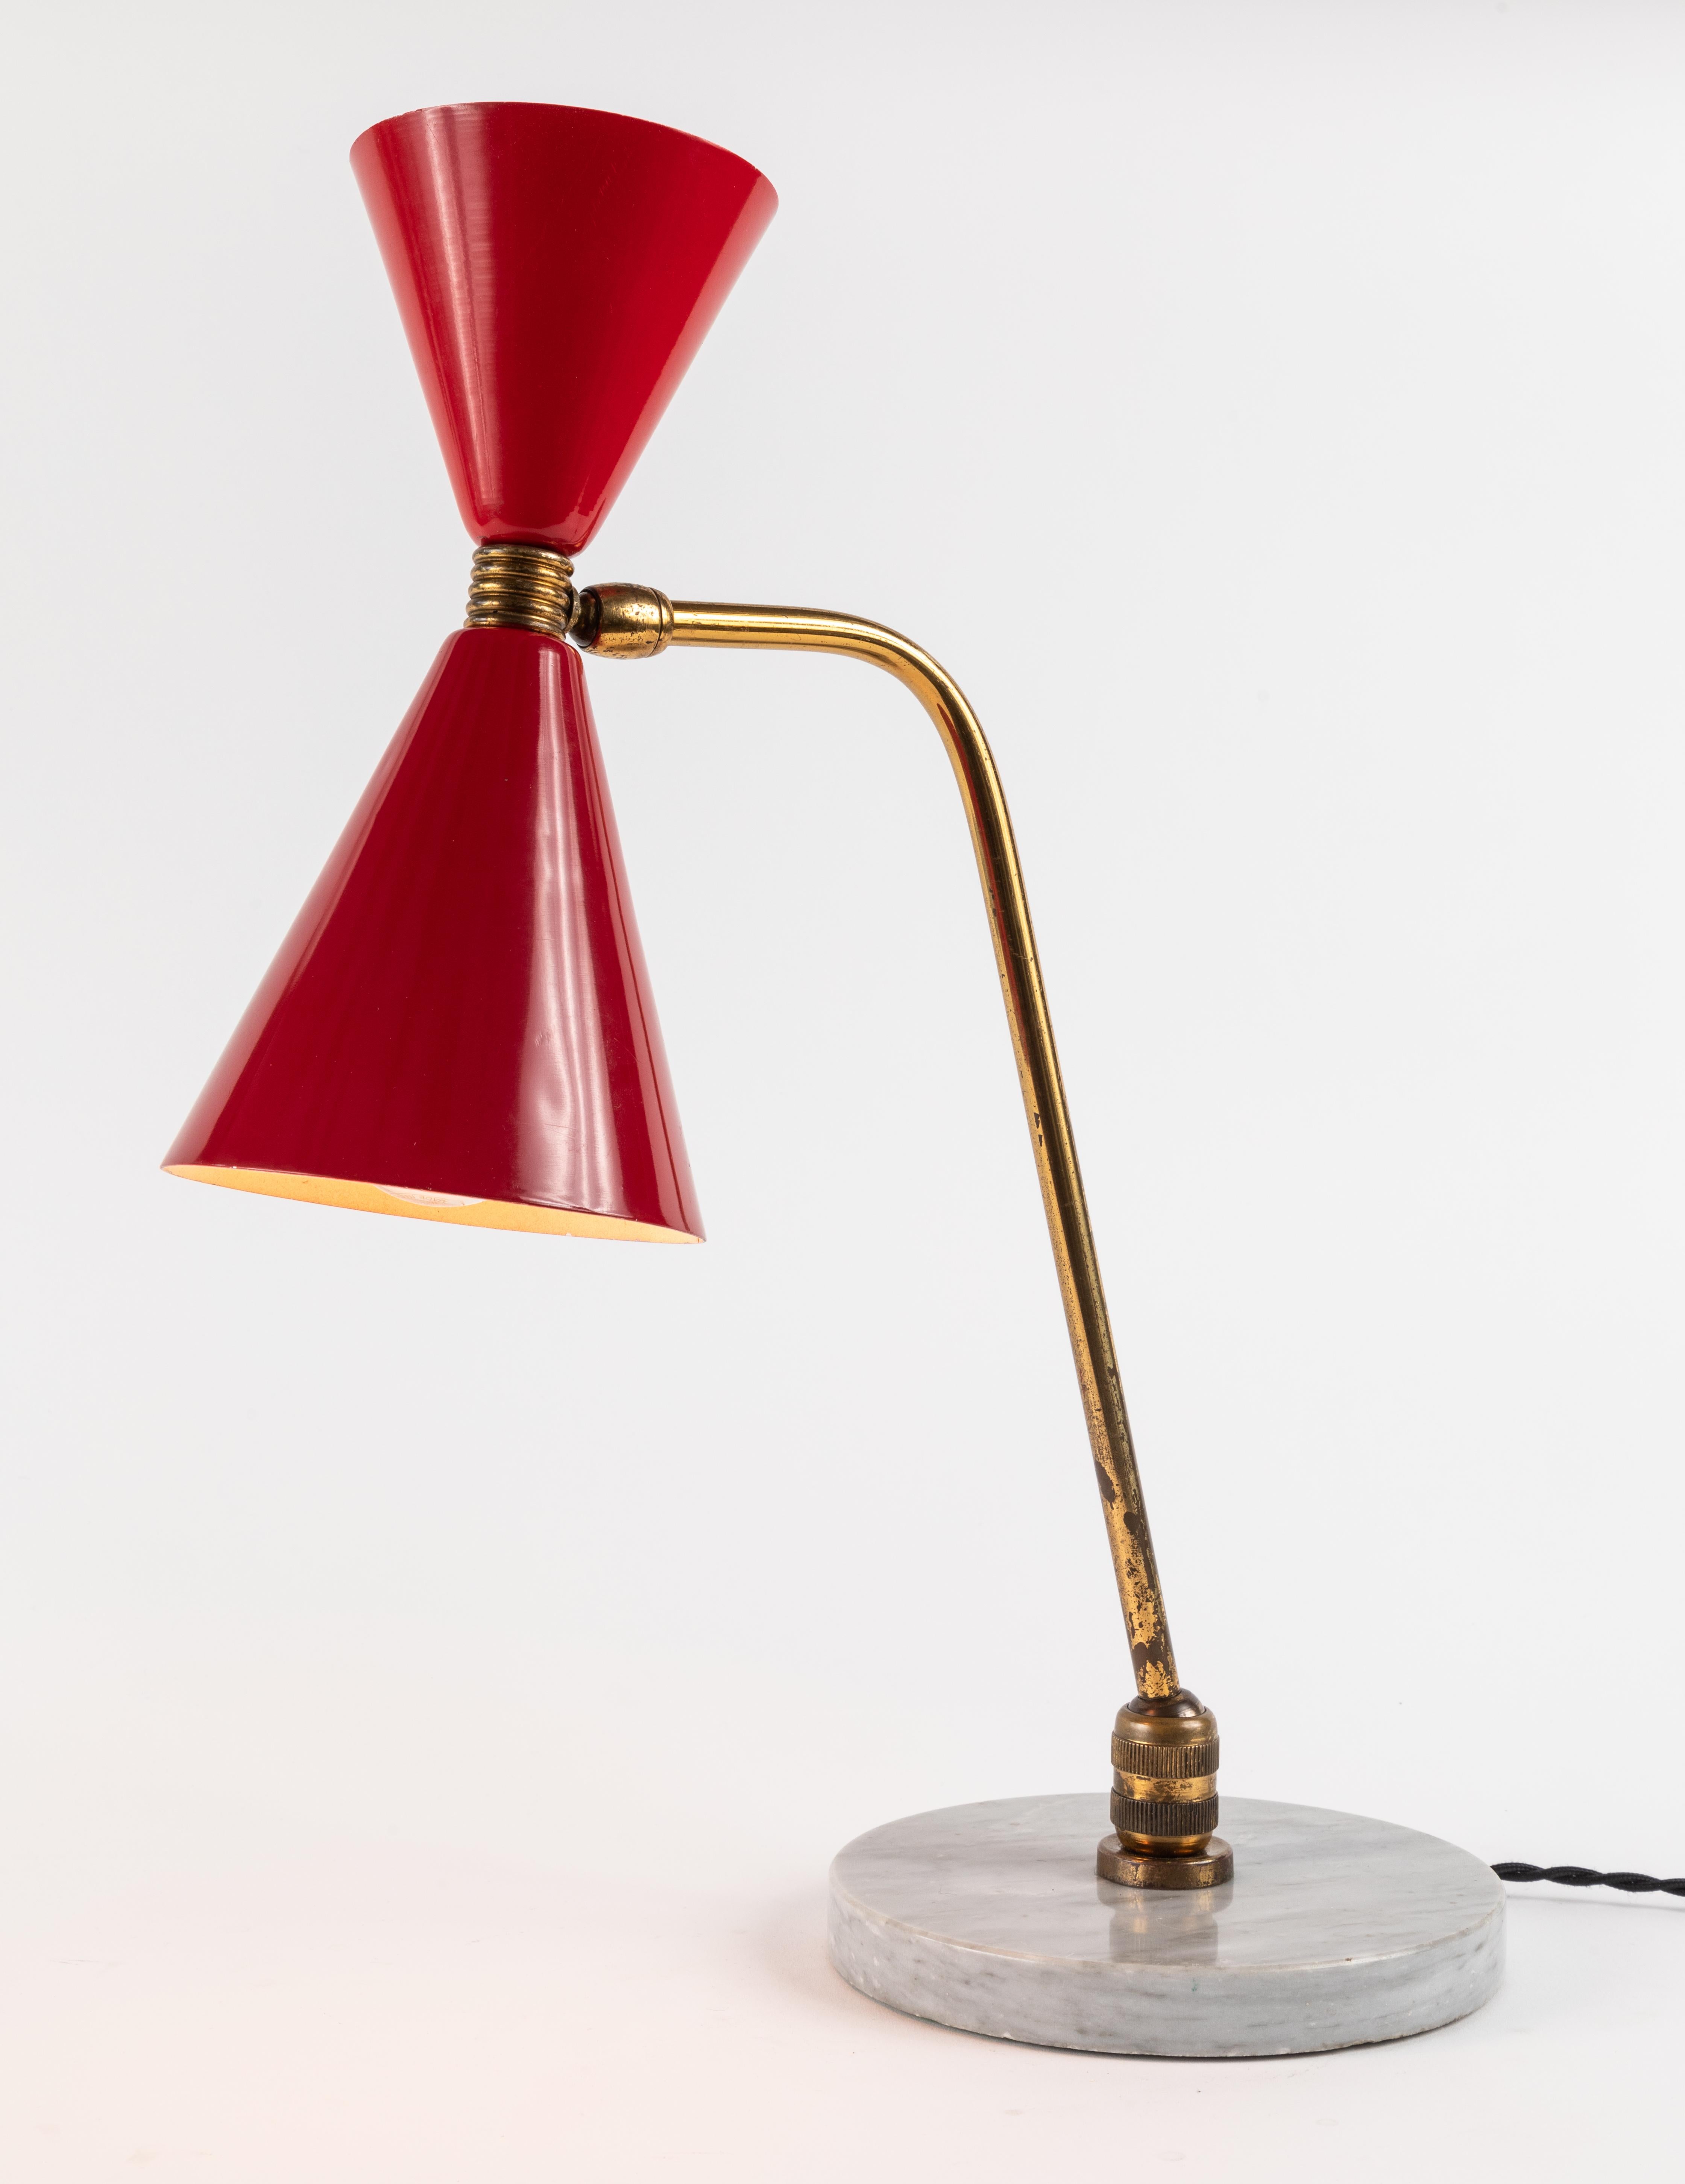 1960s red double-cone table lamp in the manner of Pierre Guariche. Executed in a heavy marble, patinated brass with lovely details and a delicate and sculptural red painted double-shade. A quintessentially midcentury French design.